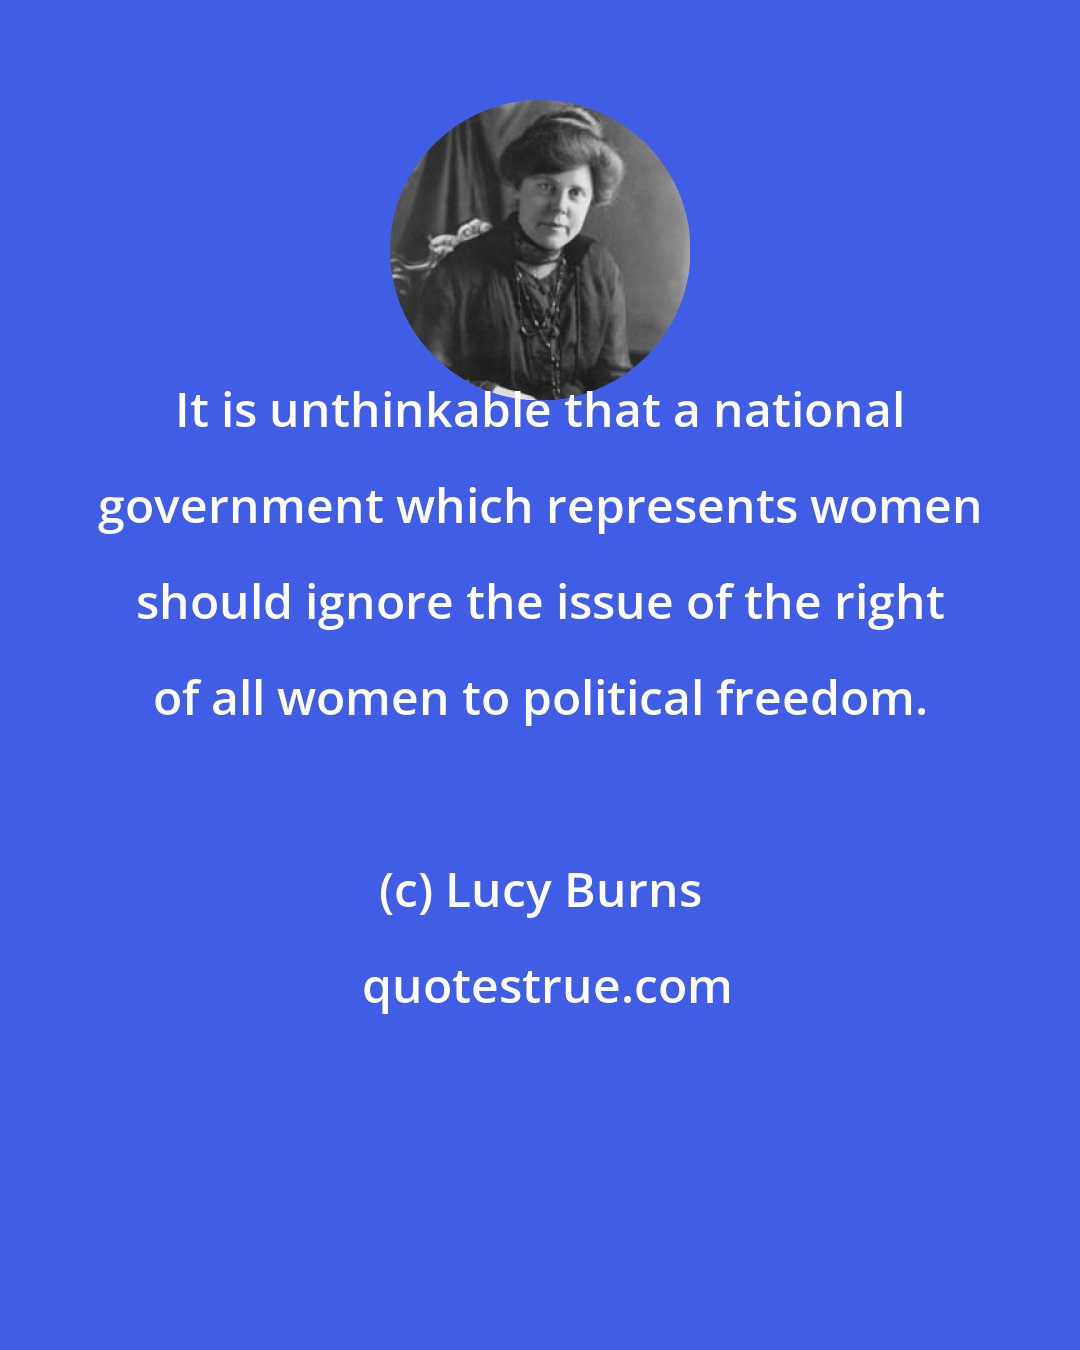 Lucy Burns: It is unthinkable that a national government which represents women should ignore the issue of the right of all women to political freedom.